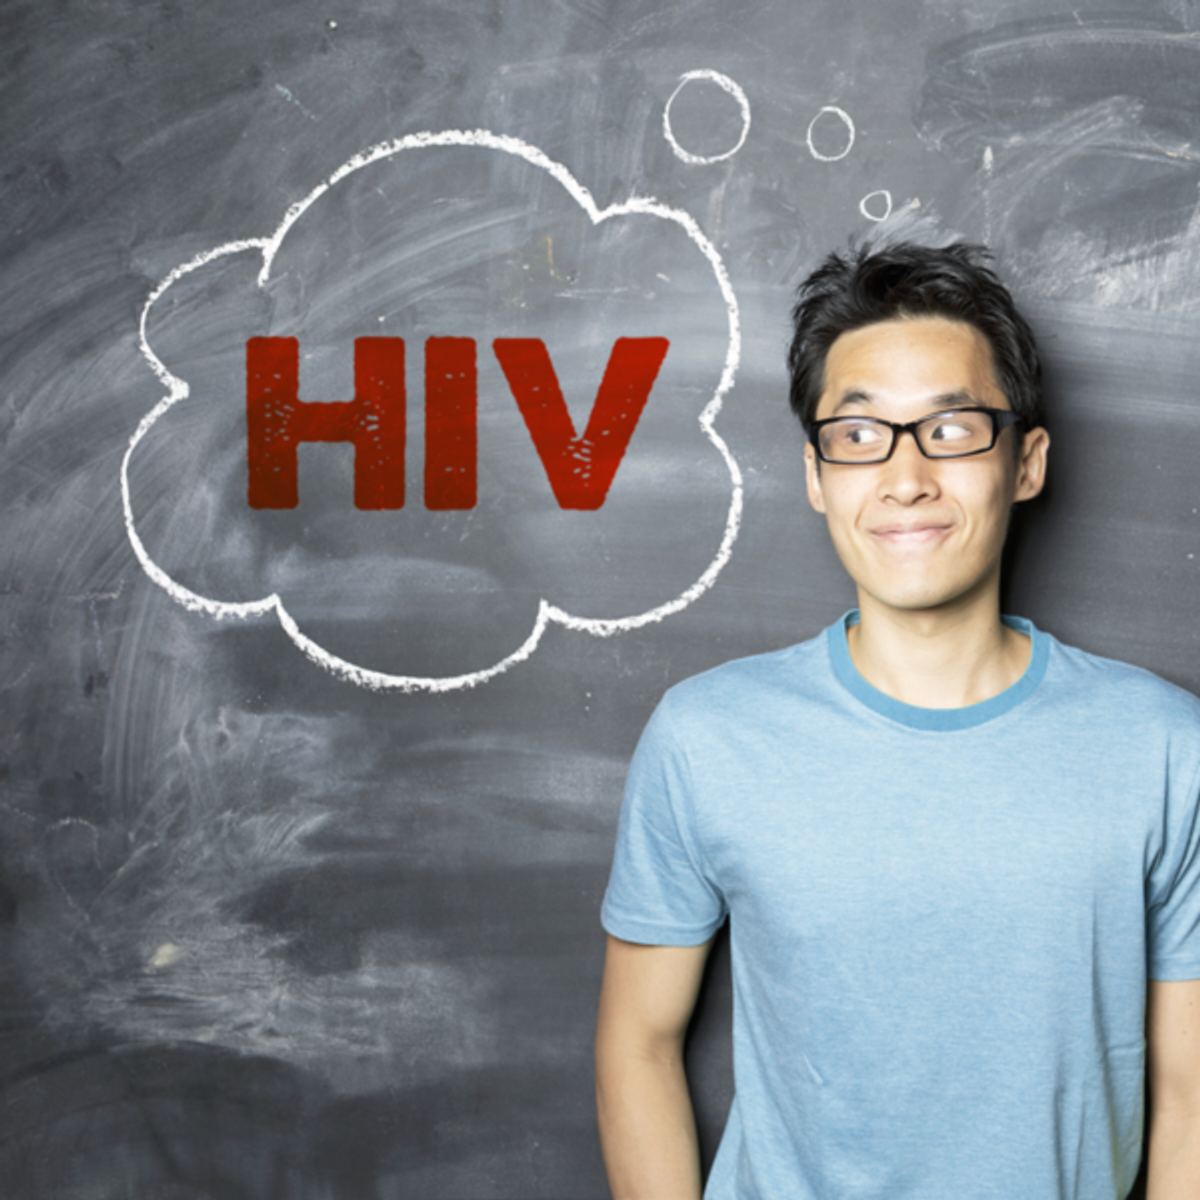 HIV: Face The Elephant In The Room